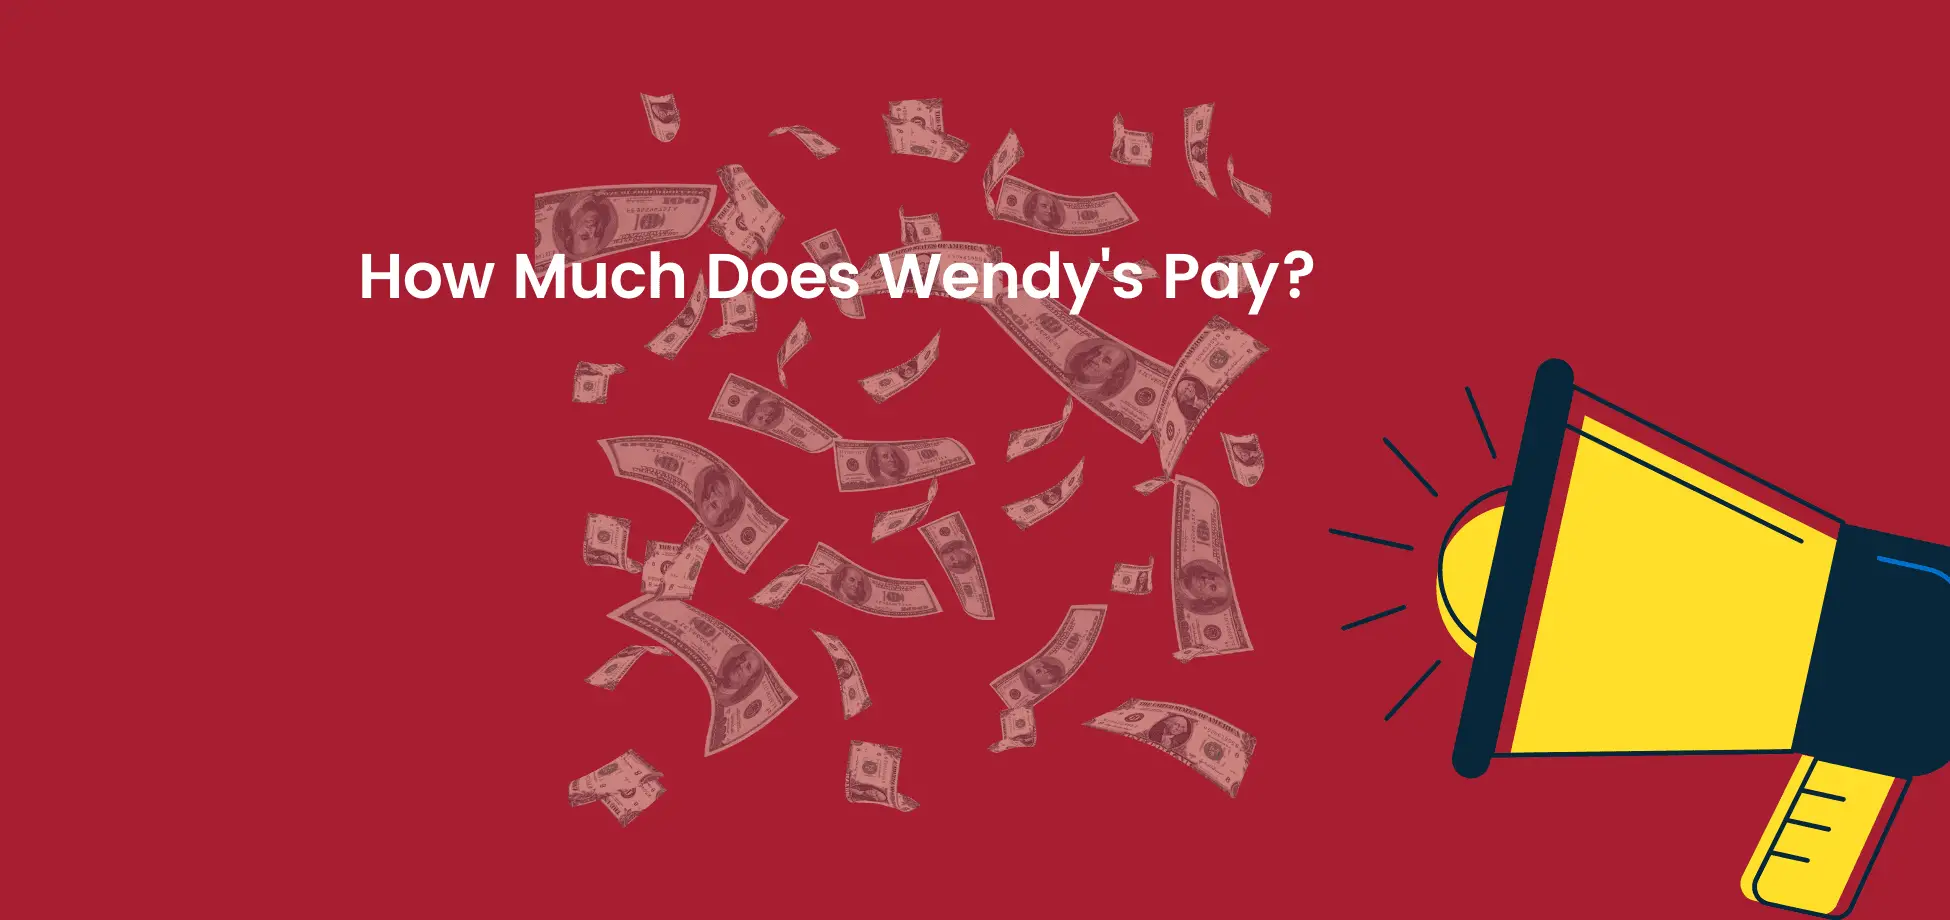 How much does Wendy's pay its employees?